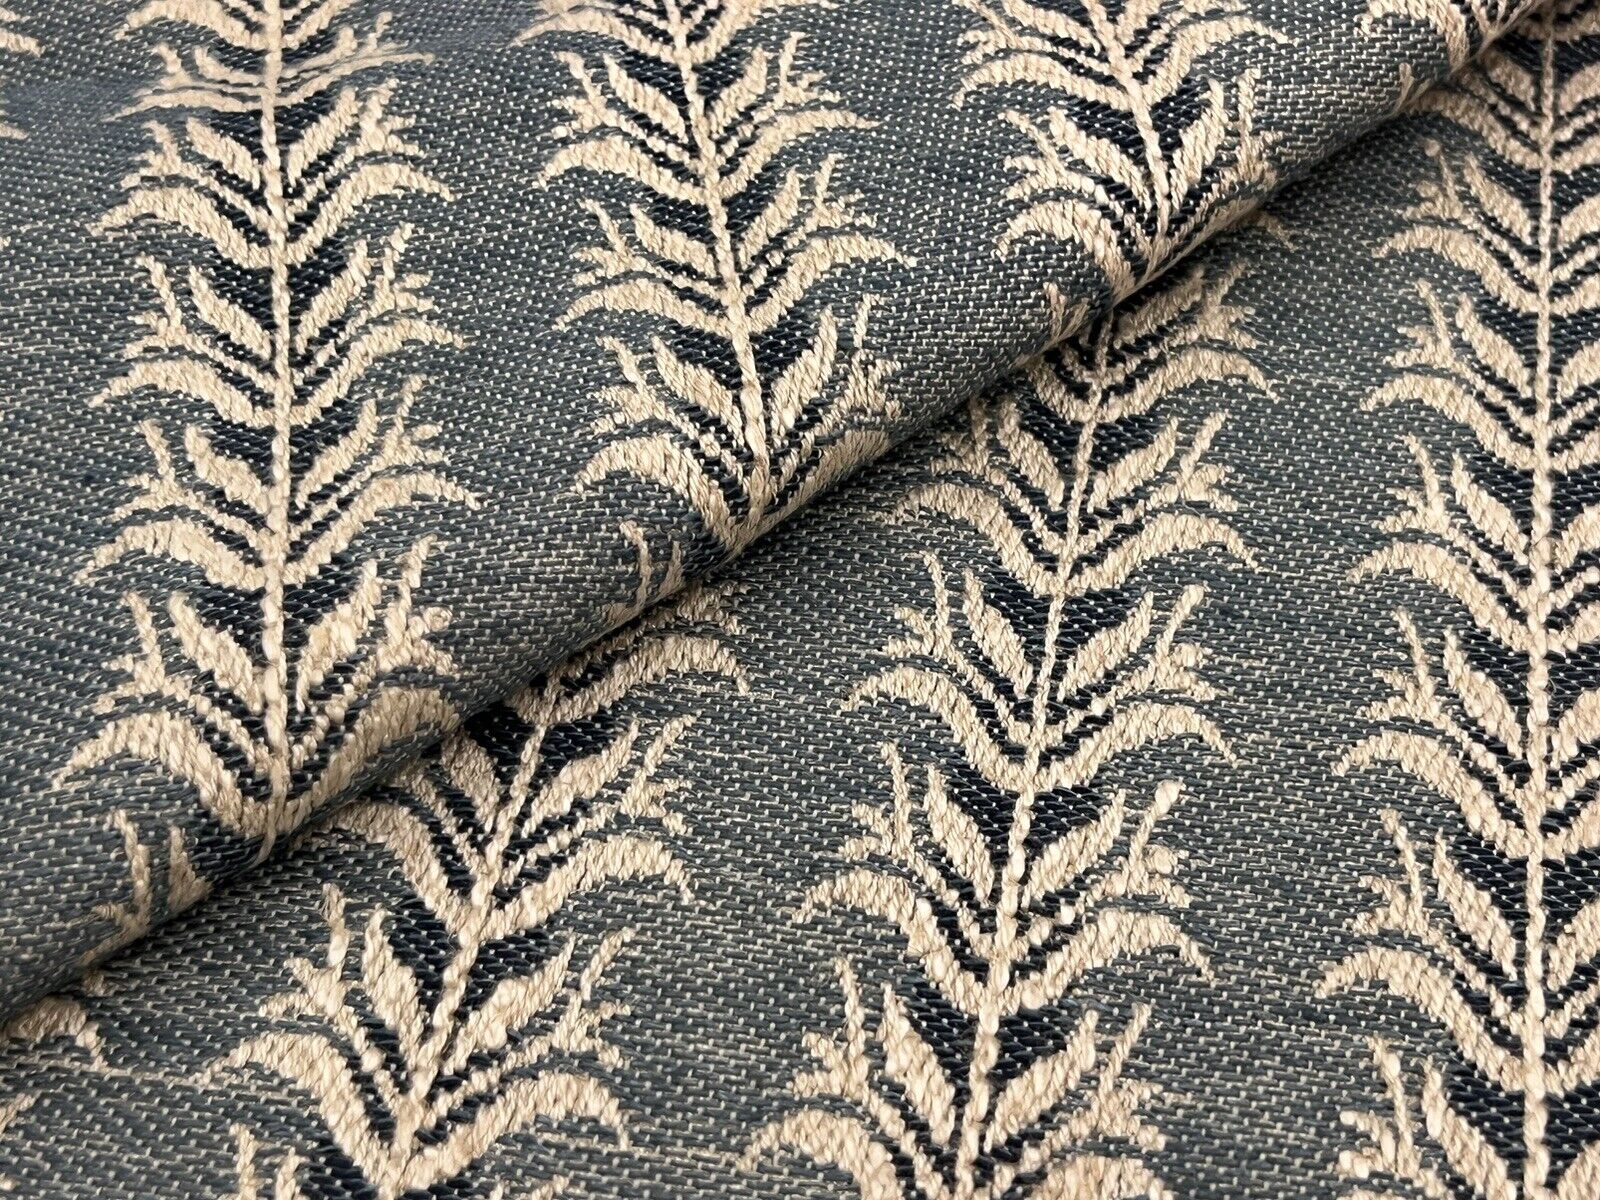 Colefax & Fowler Branching Leaf Striped Fabric- Hampden / Navy 3.20 yds F4852-01